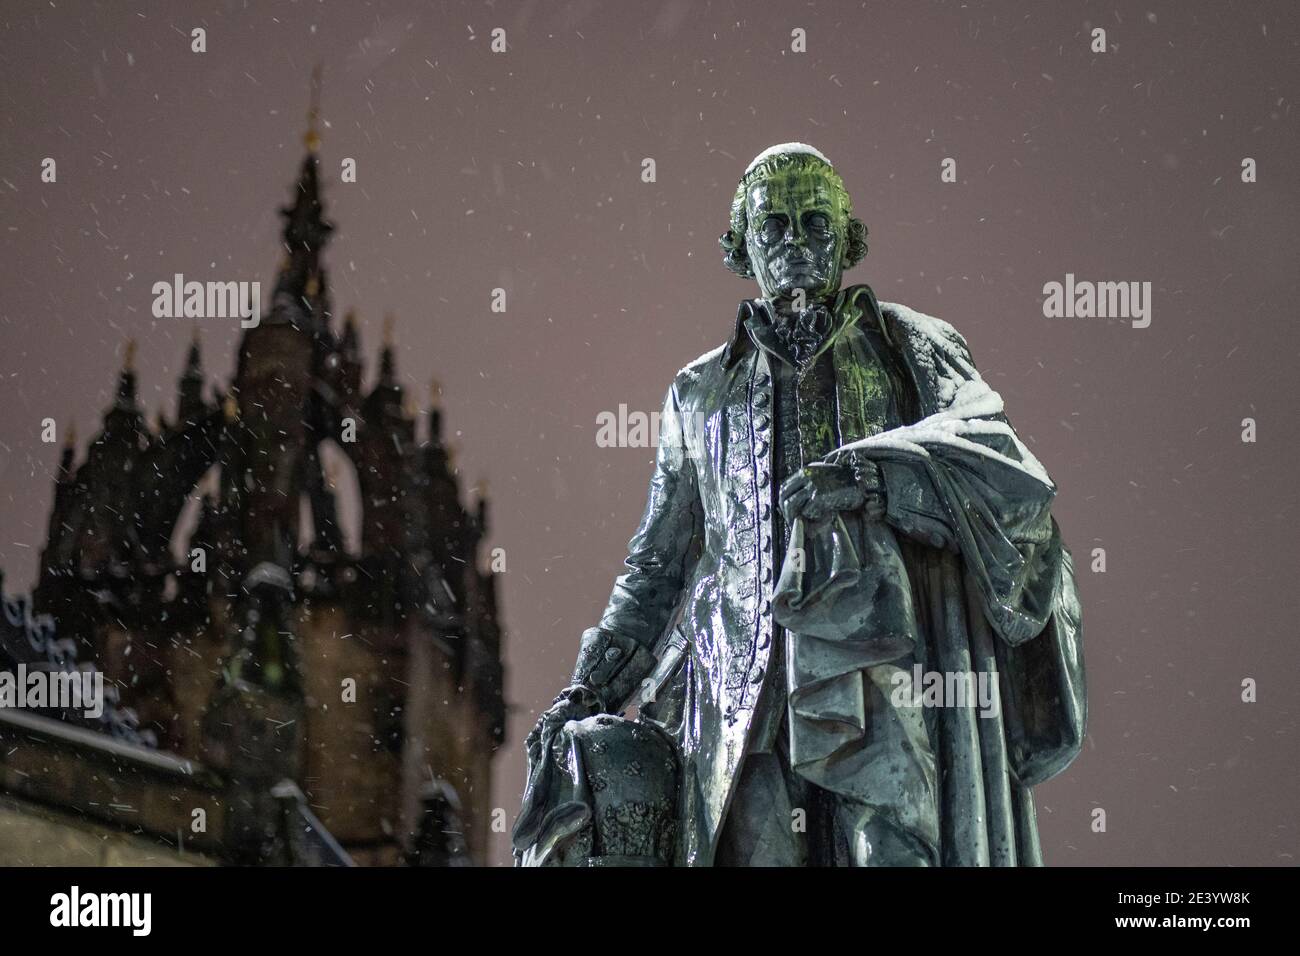 Edinburgh, Scotland, UK. 21 January 2020. Scenes taken between 4am and 5am in Edinburgh city centre after overnight snow fall. Statue of Adam Smith on royal Mile covered in snow. Iain Masterton/Alamy Live News Stock Photo